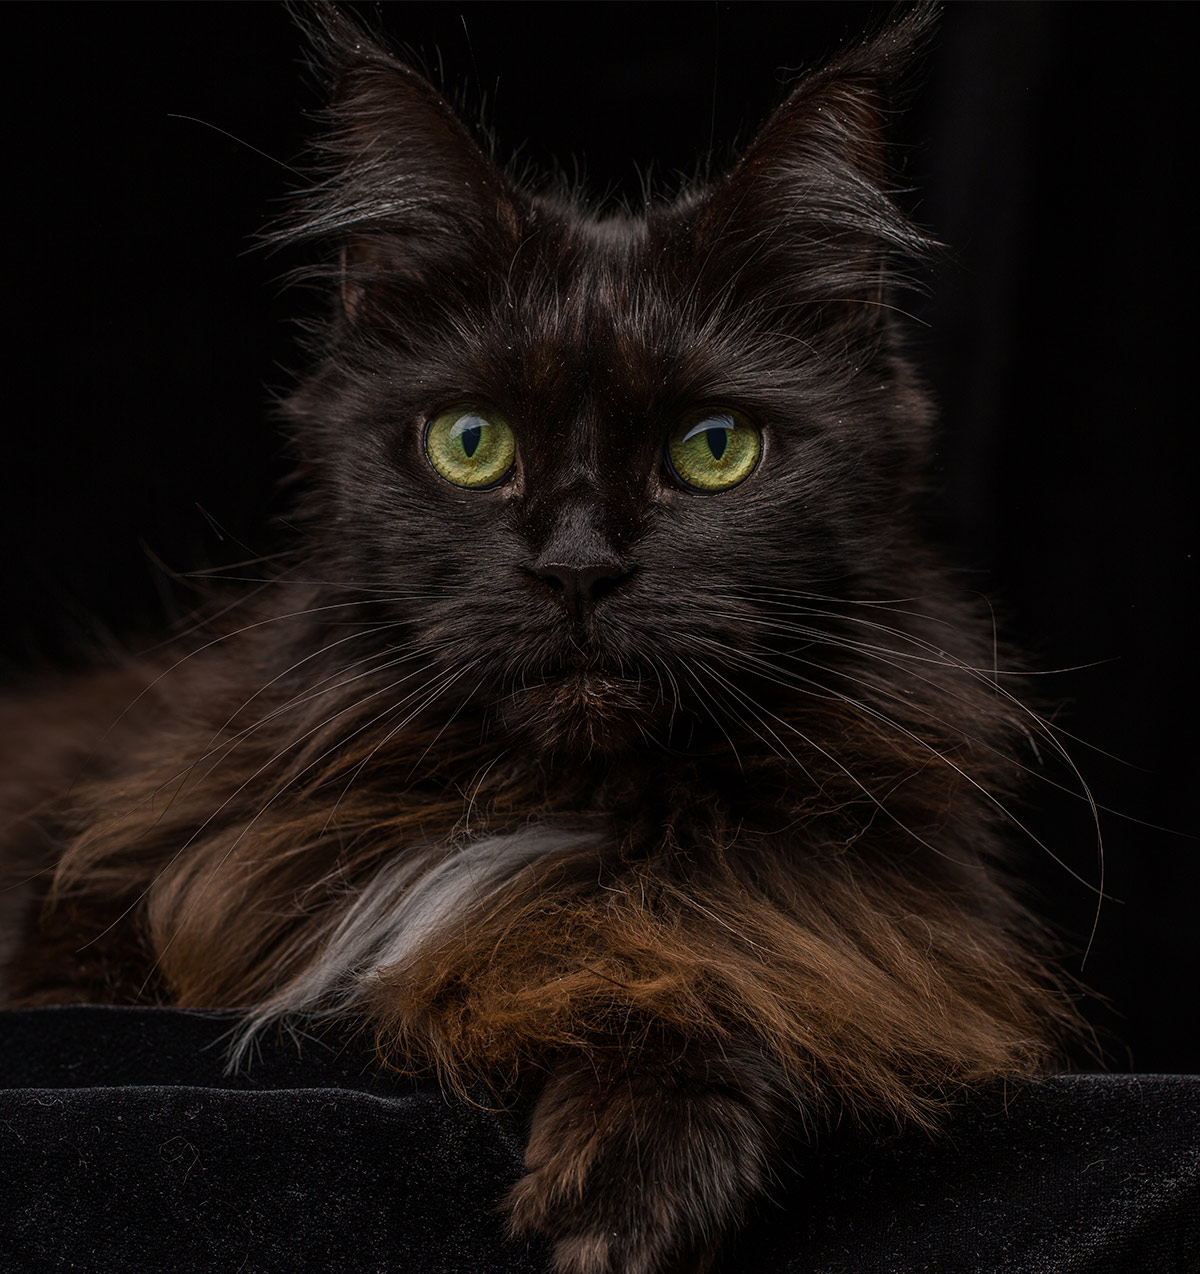 Pictures of Maine Coon cats